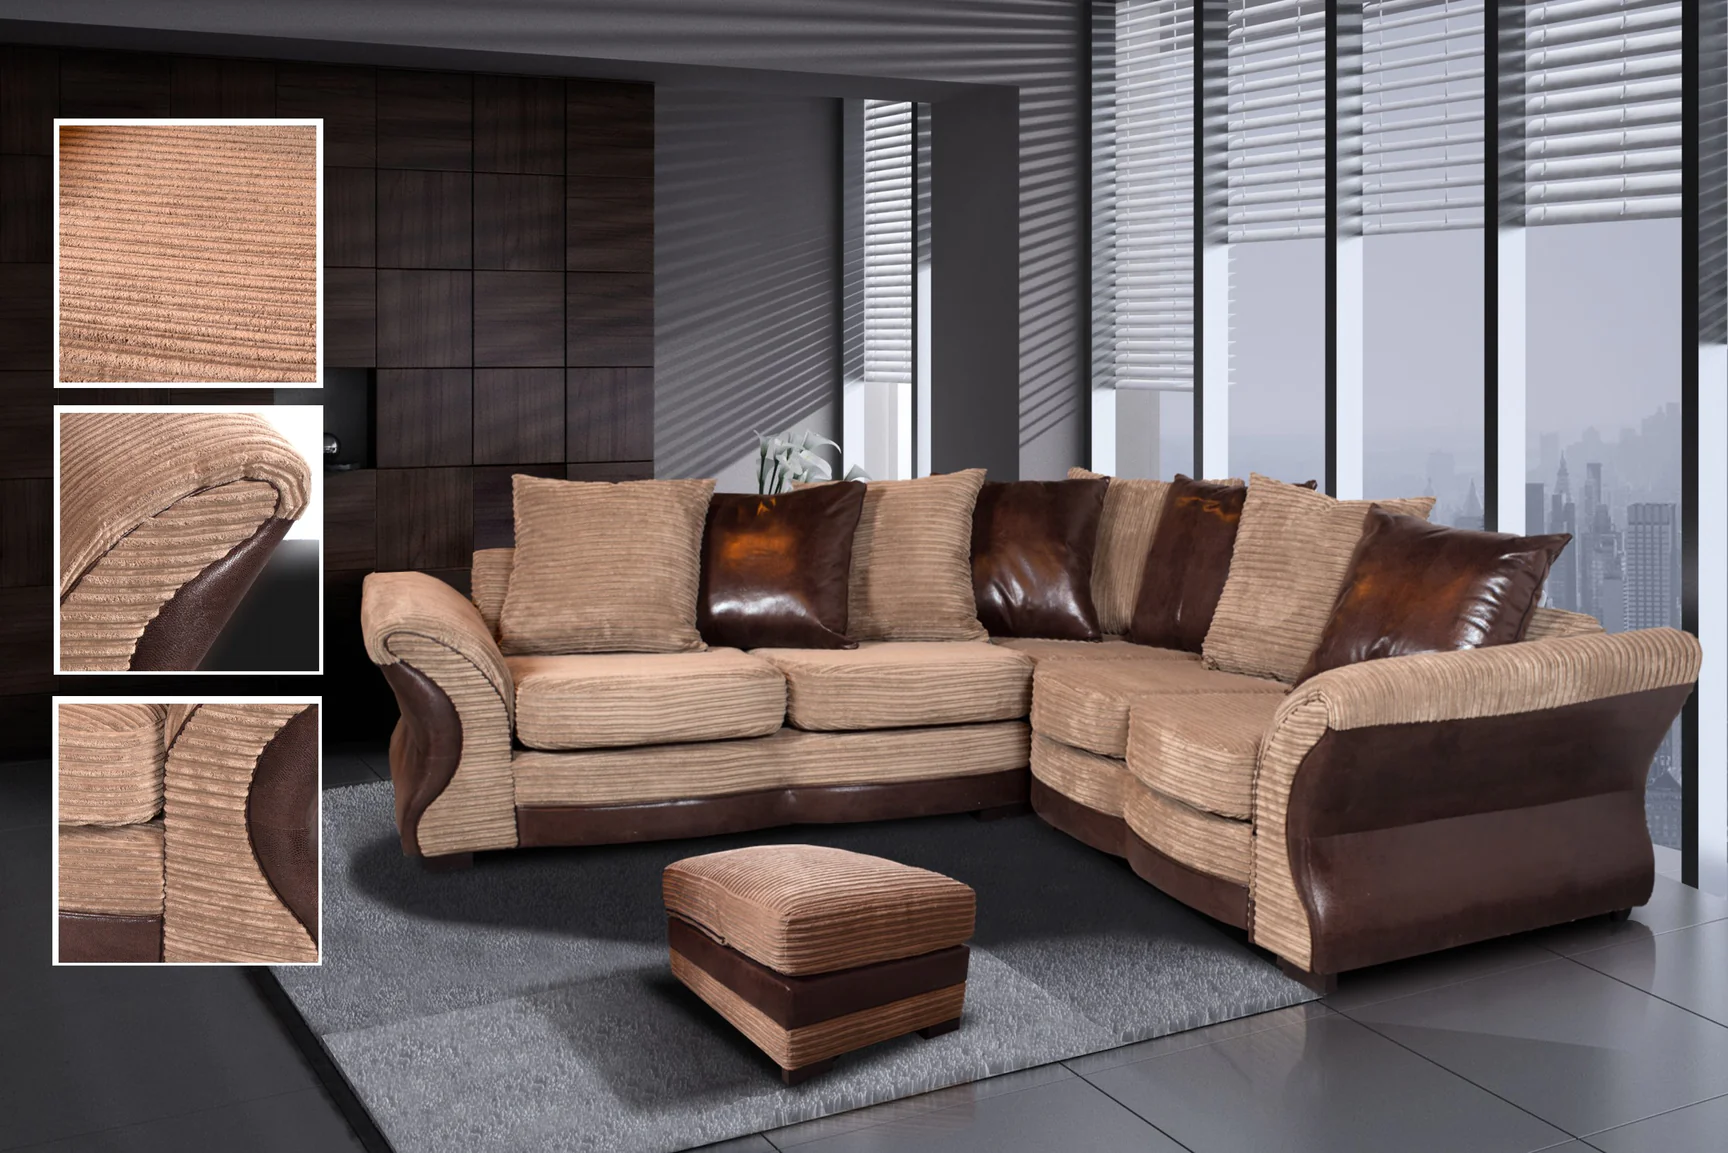 What Makes Fabric Corner Sofas an Ideal Choice for Stylish and Functional Living Spaces